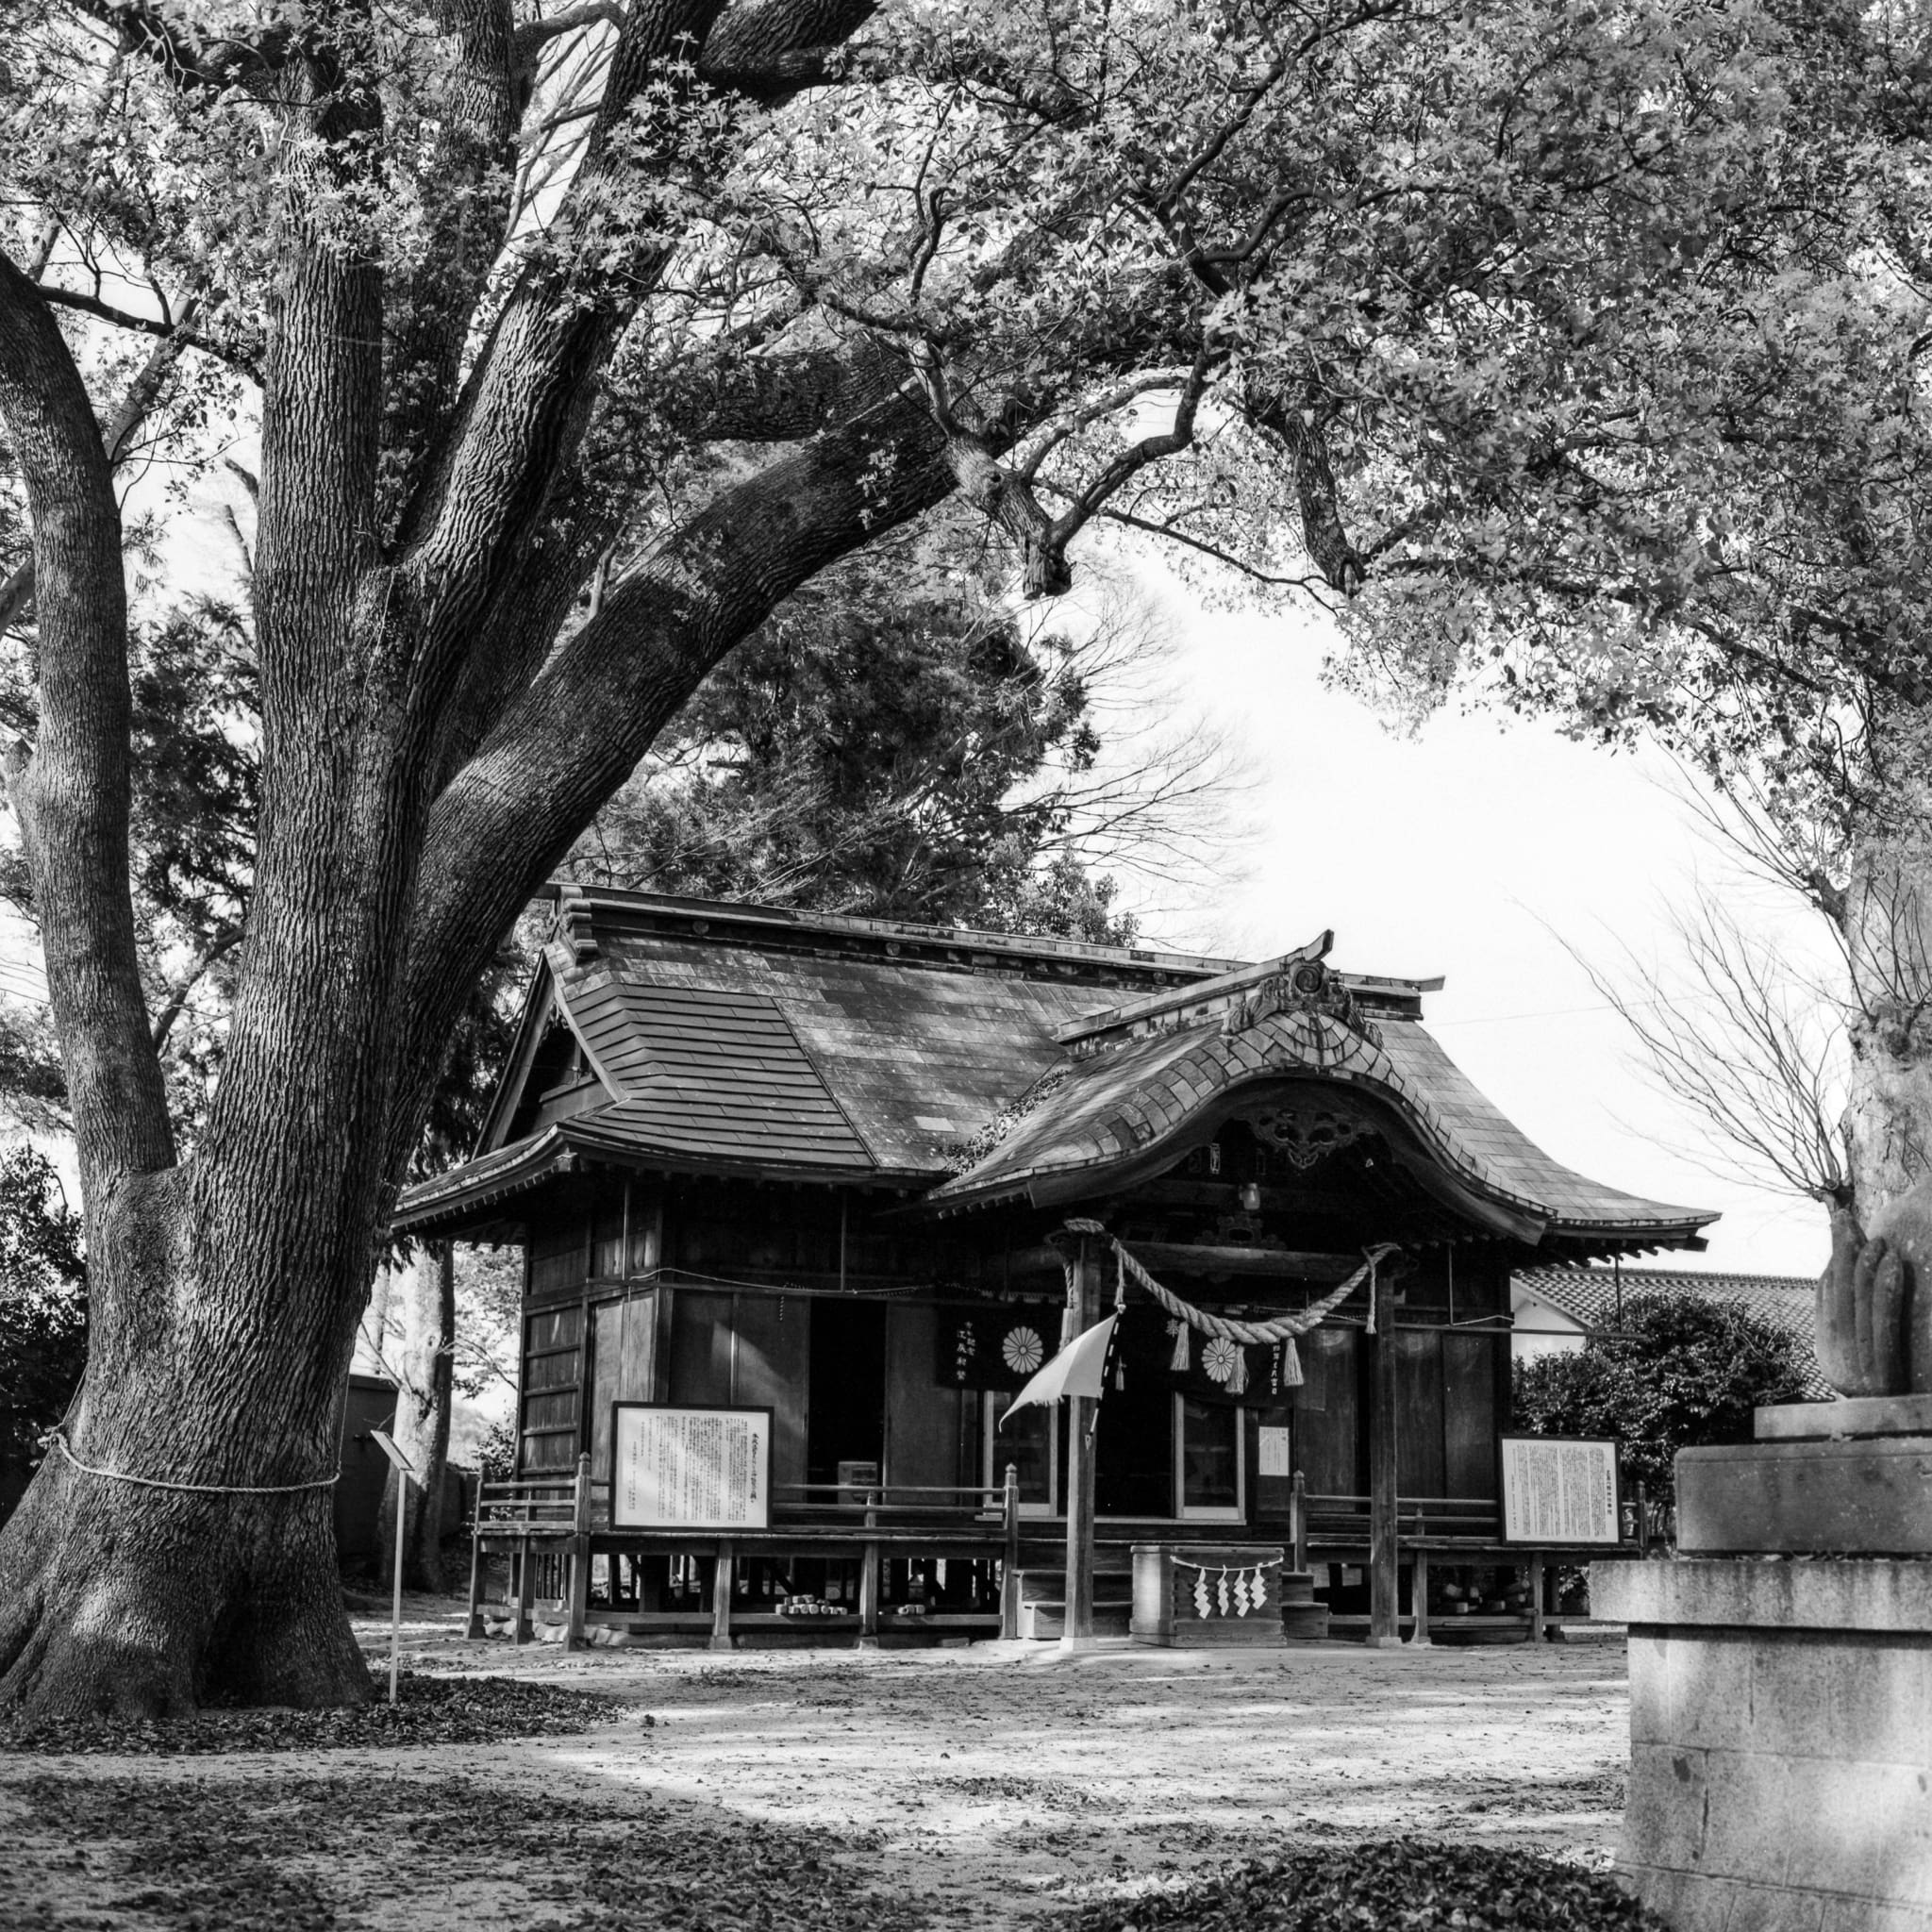 Peaceful Japanese shrine nestled among trees in a monochrome forest setting.